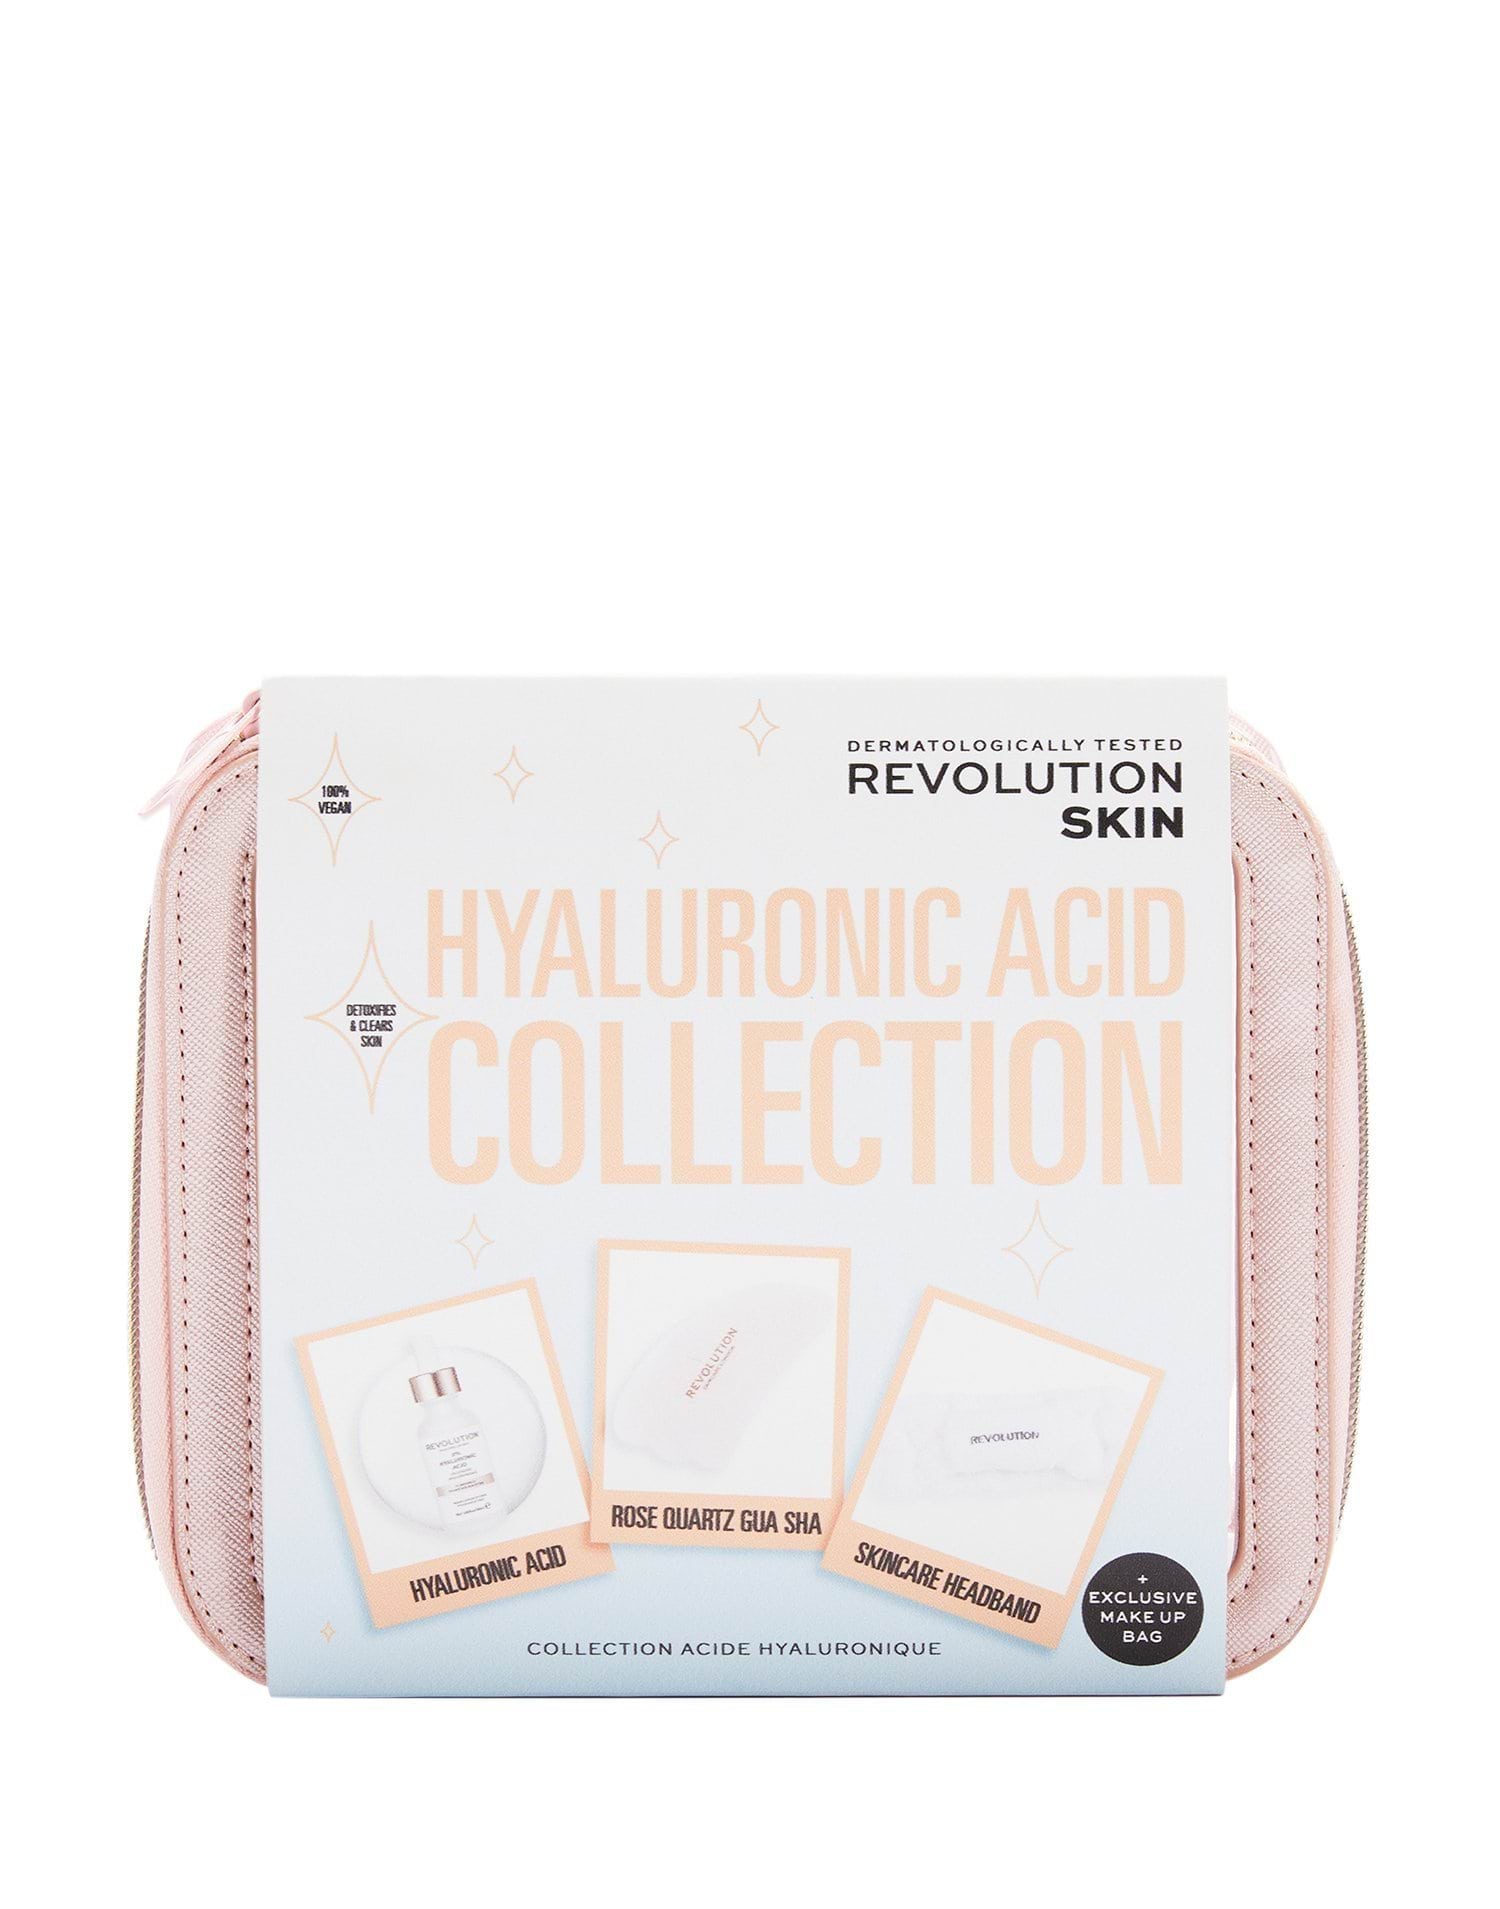 The Hyaluronic Acid Collection